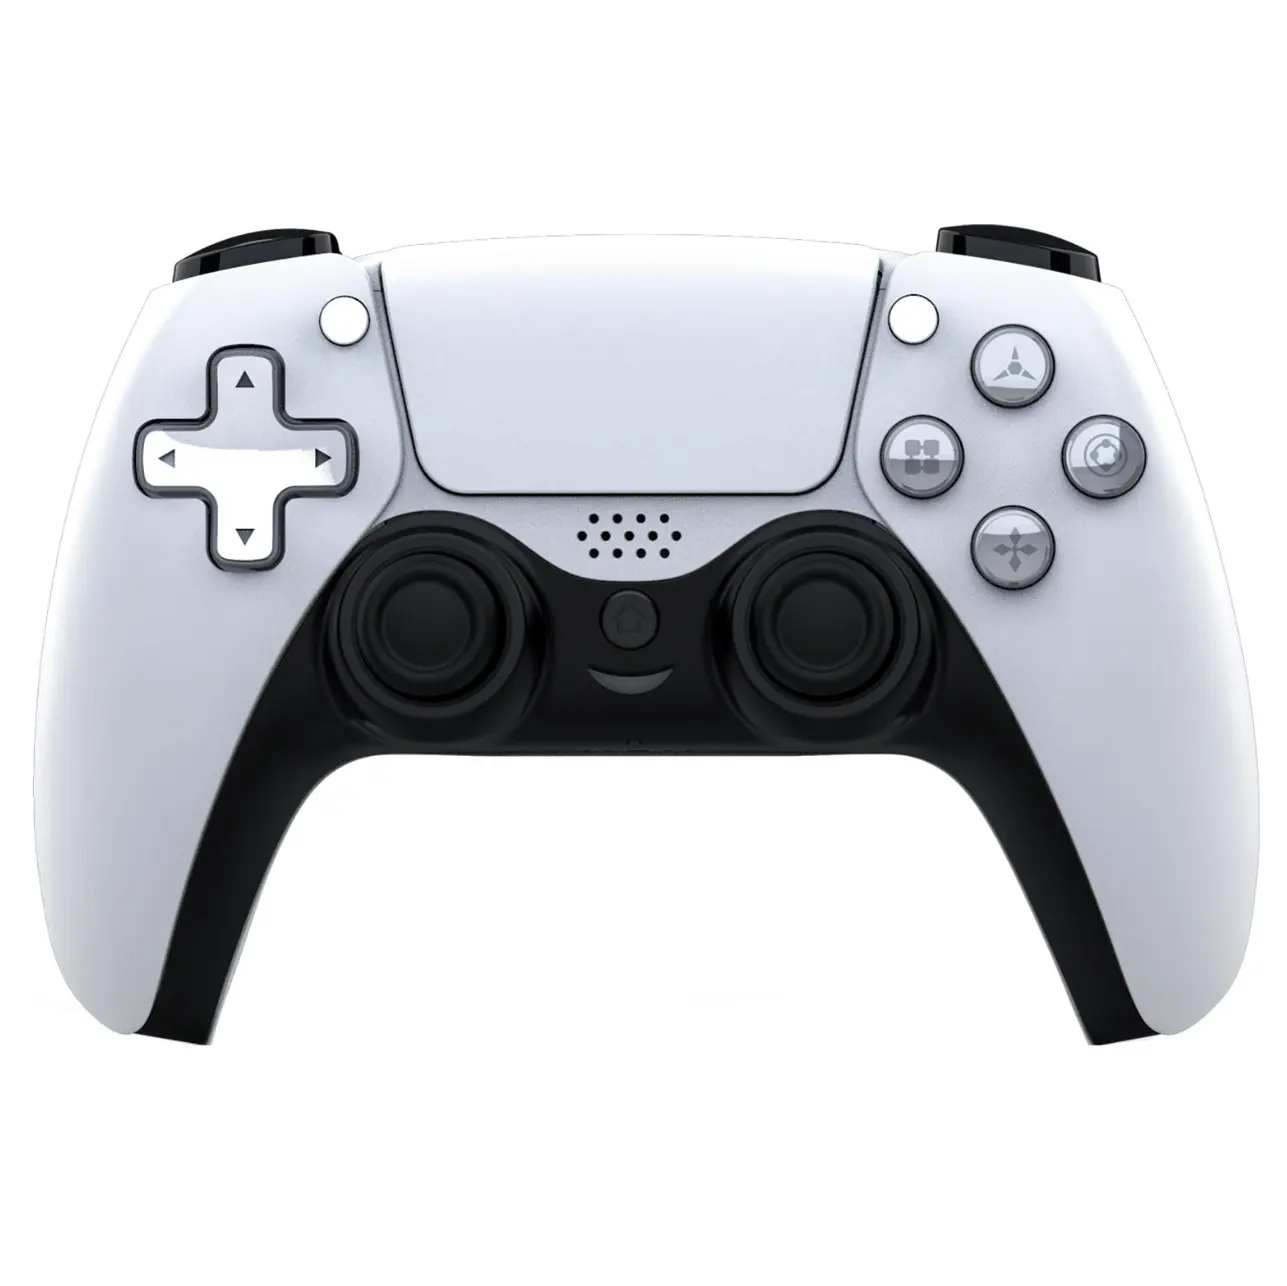 New High Quality Wireless Controller with headphone jack for PS4 Gamepad